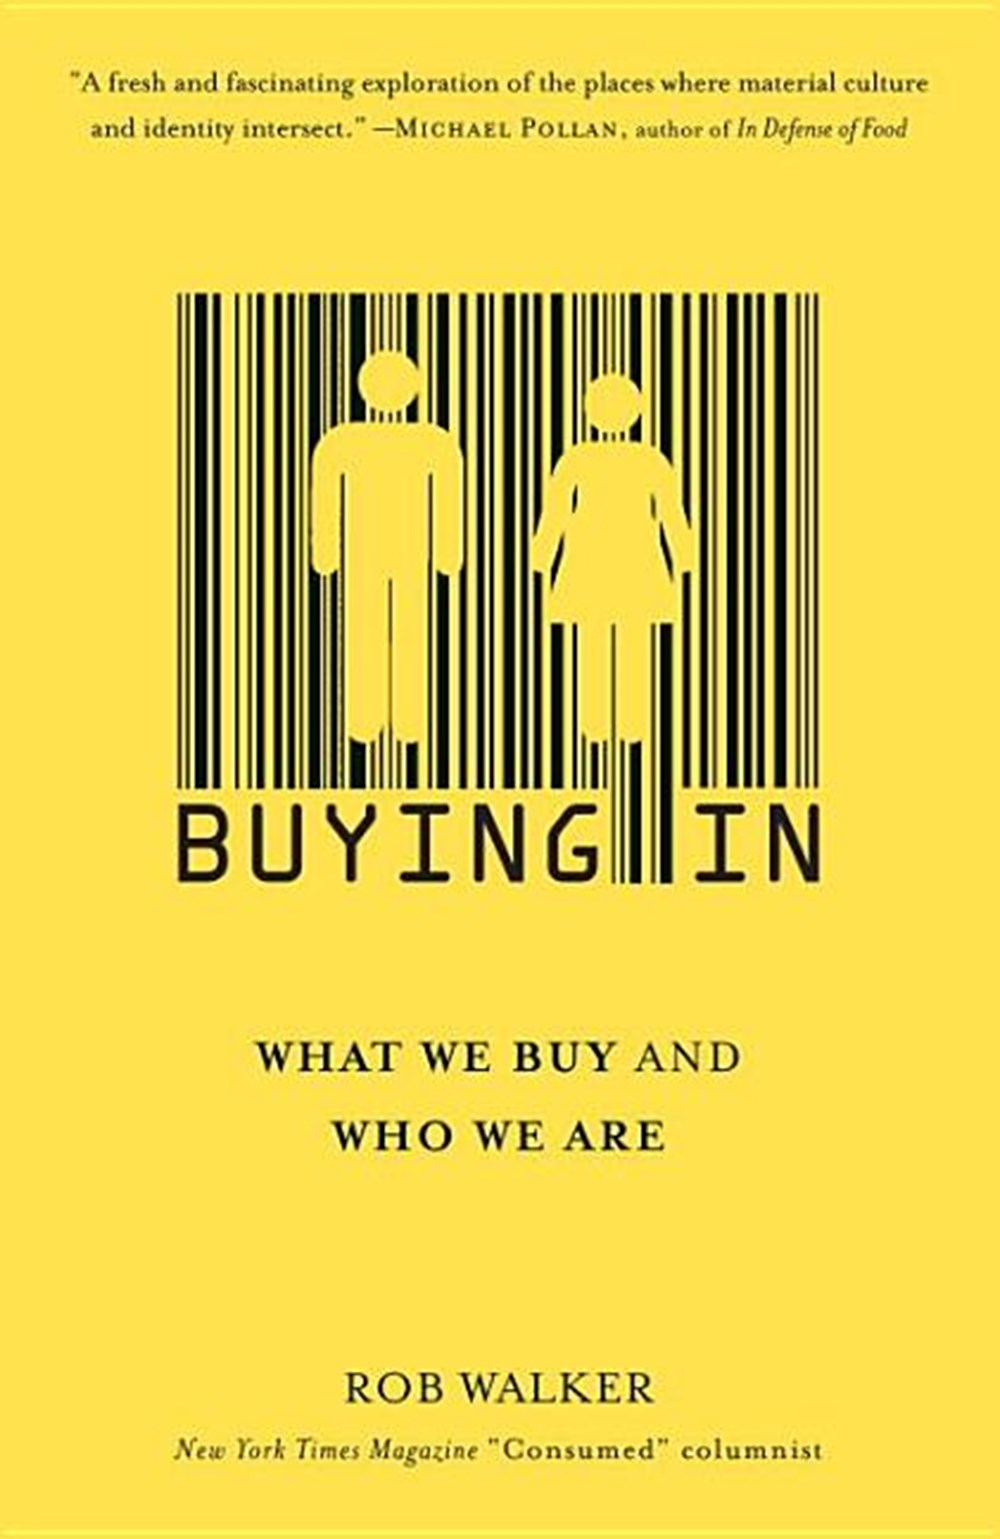 Buying in: What We Buy and Who We Are